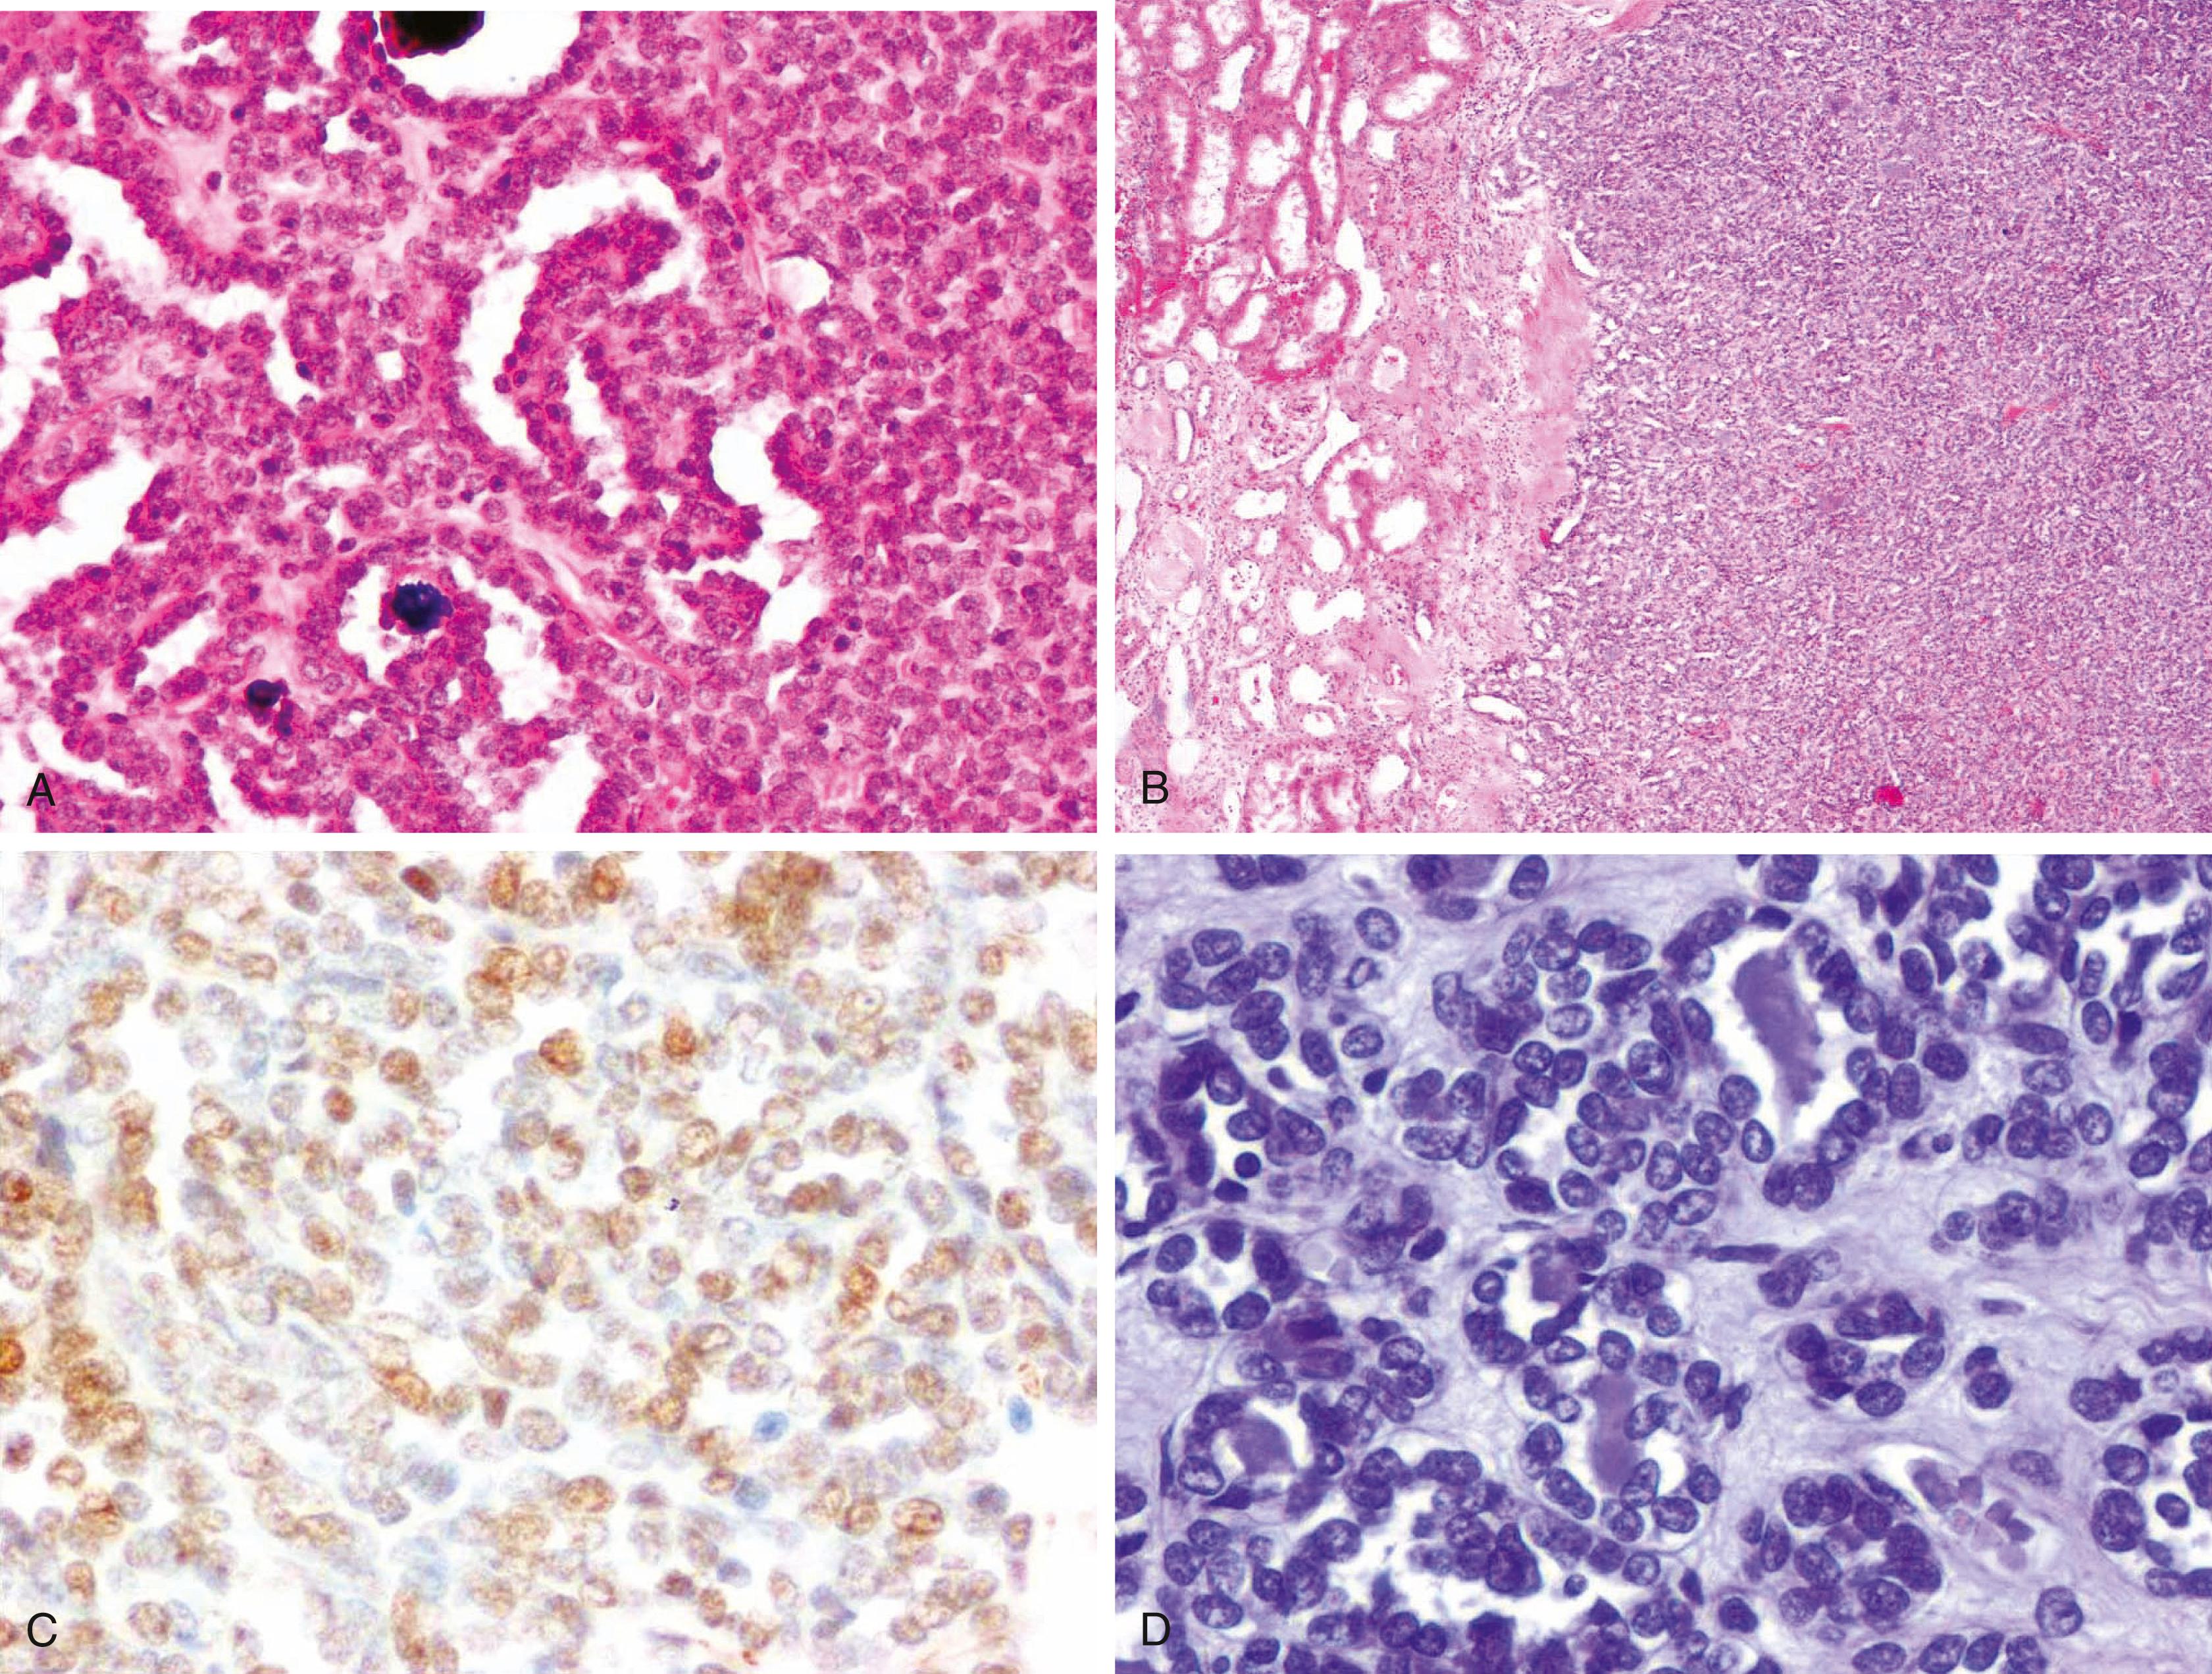 Fig. 17.20, Metanephric adenoma (A and B) showing positive nuclear staining for Wilms tumor 1 (C), with lack of cytokeratin 7 expression (D).